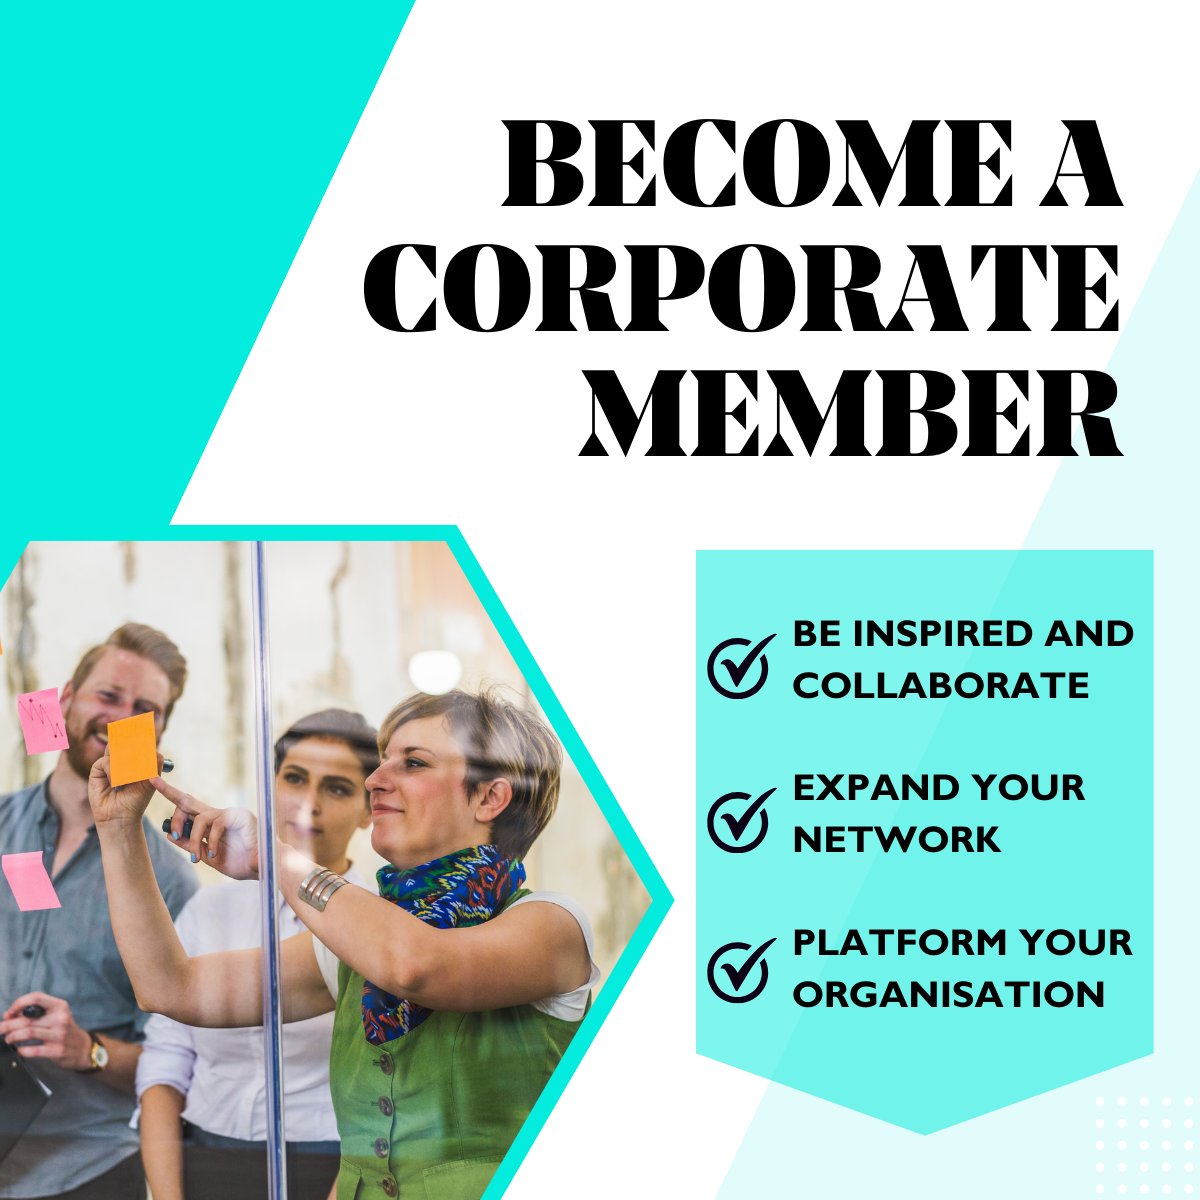 Introducing our corporate membership! Join today and place your organisation at the heart of social change. Enjoy a year of priority tickets to exclusive events, 10 Fellowships for your staff, and so much more. Find out here: thersa.co/3WnRm2g